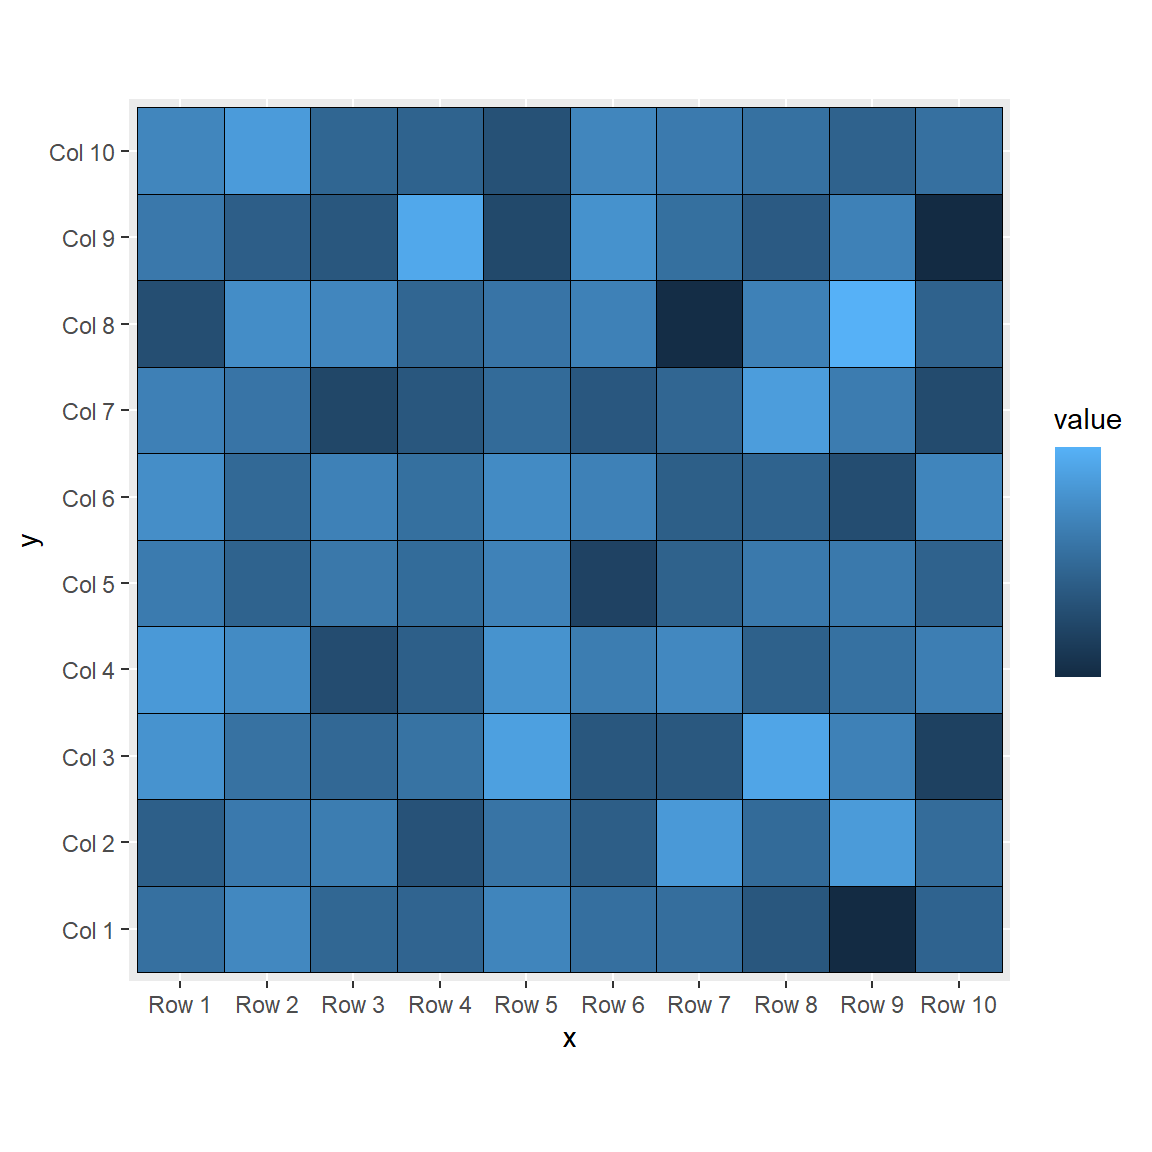 Remove the ticks and the labels of the color bar in ggplot2